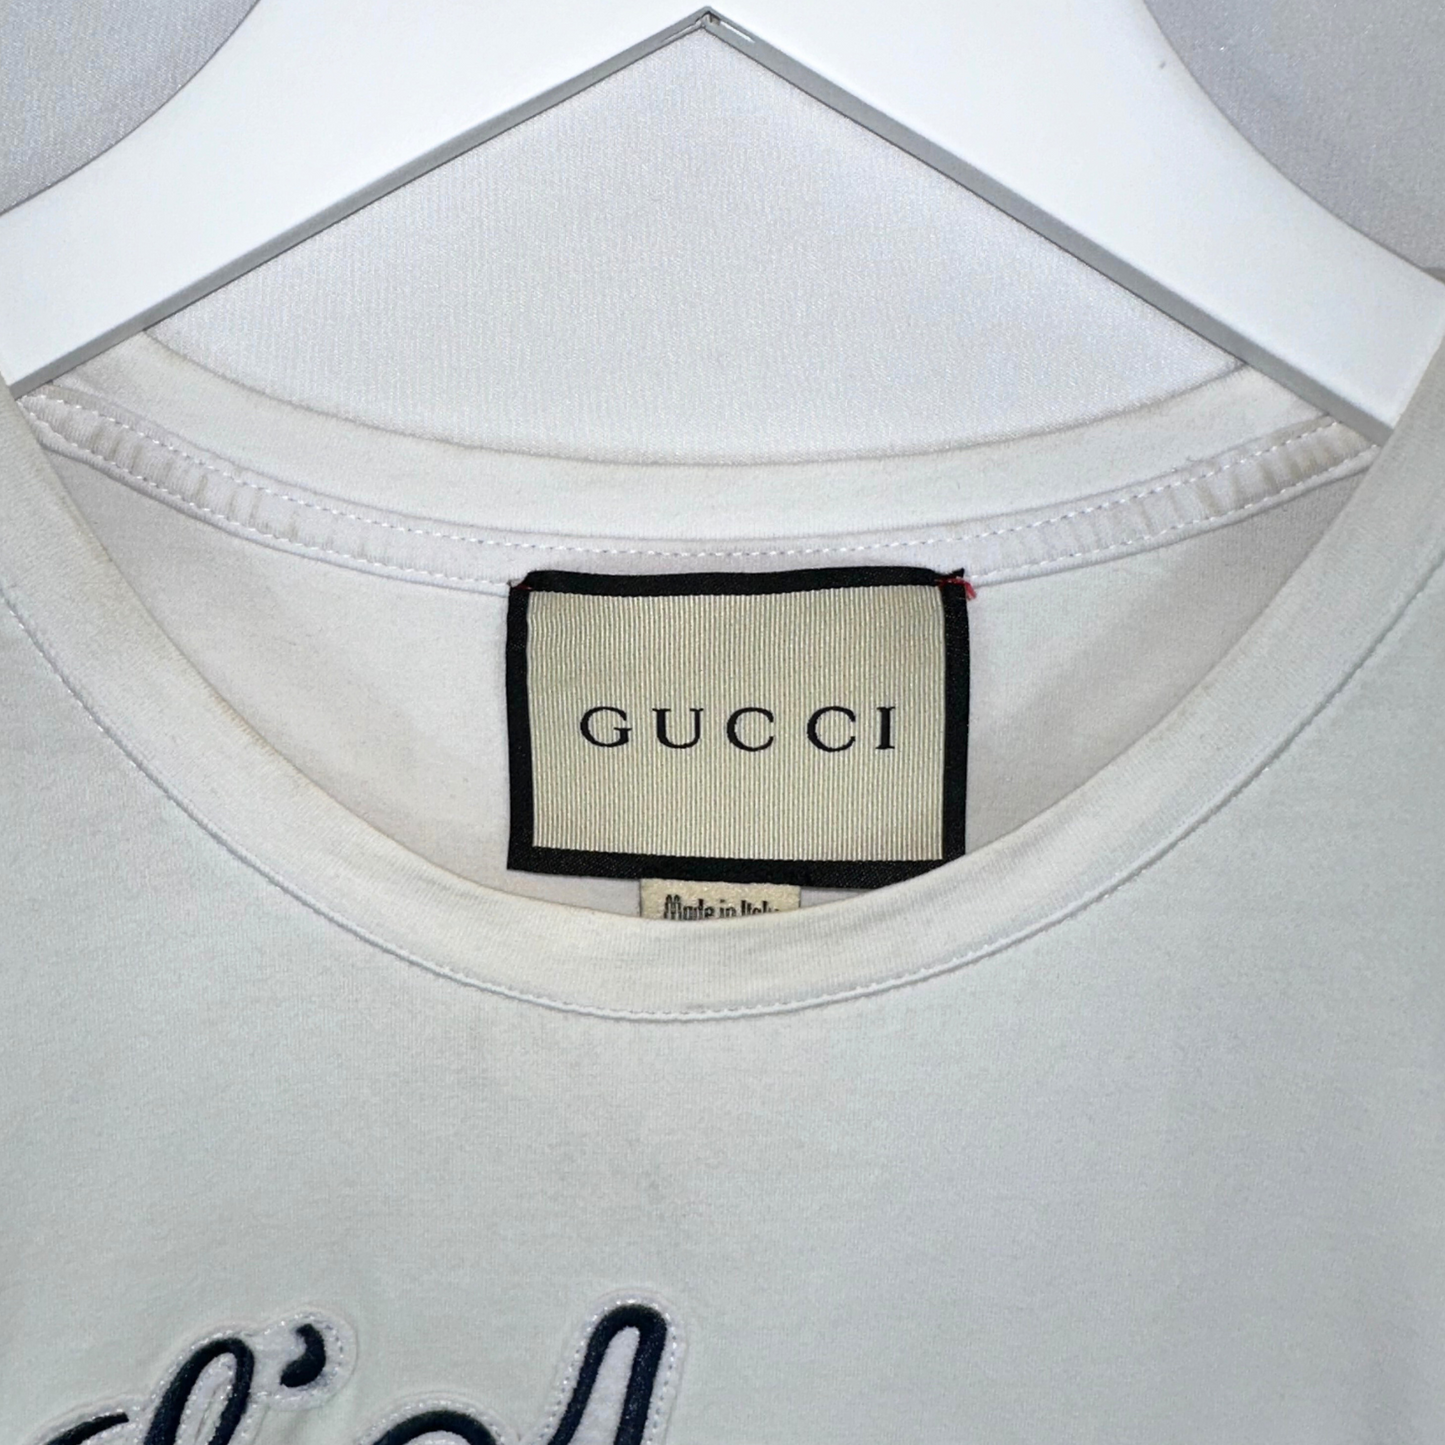 GUCCI Embroidered Tee